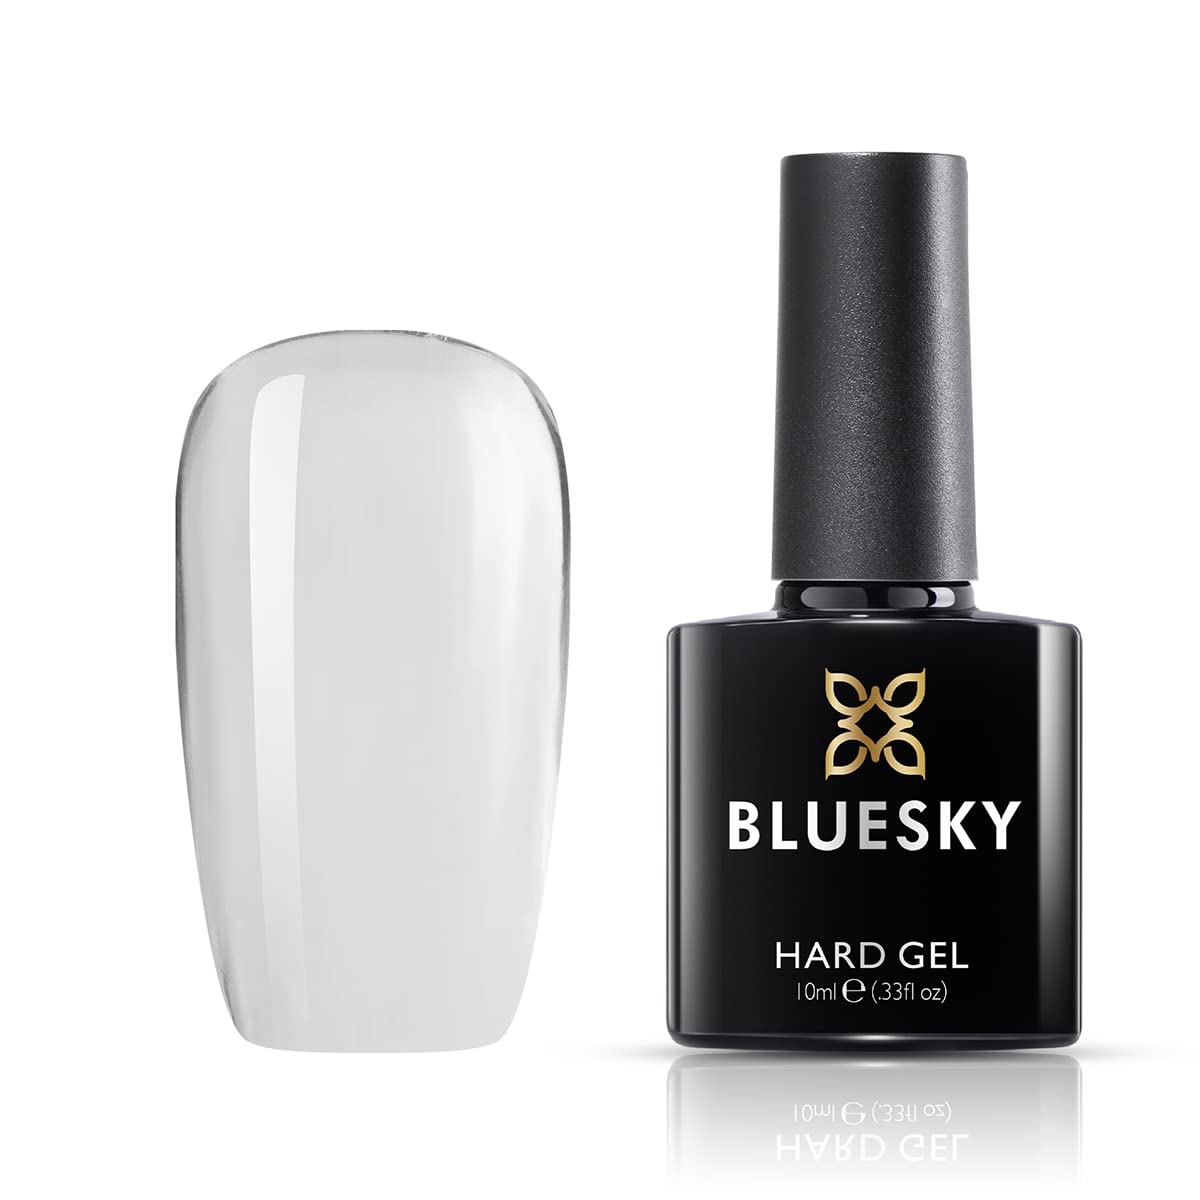 Bluesky Gel Nail Polish, Hard Gel, Builder Gel and Strengthener Gel for Hard, Strong Nails, Extensions and Growth, Clear, 10 ml (Requires Curing Under LED or UV Lamp)